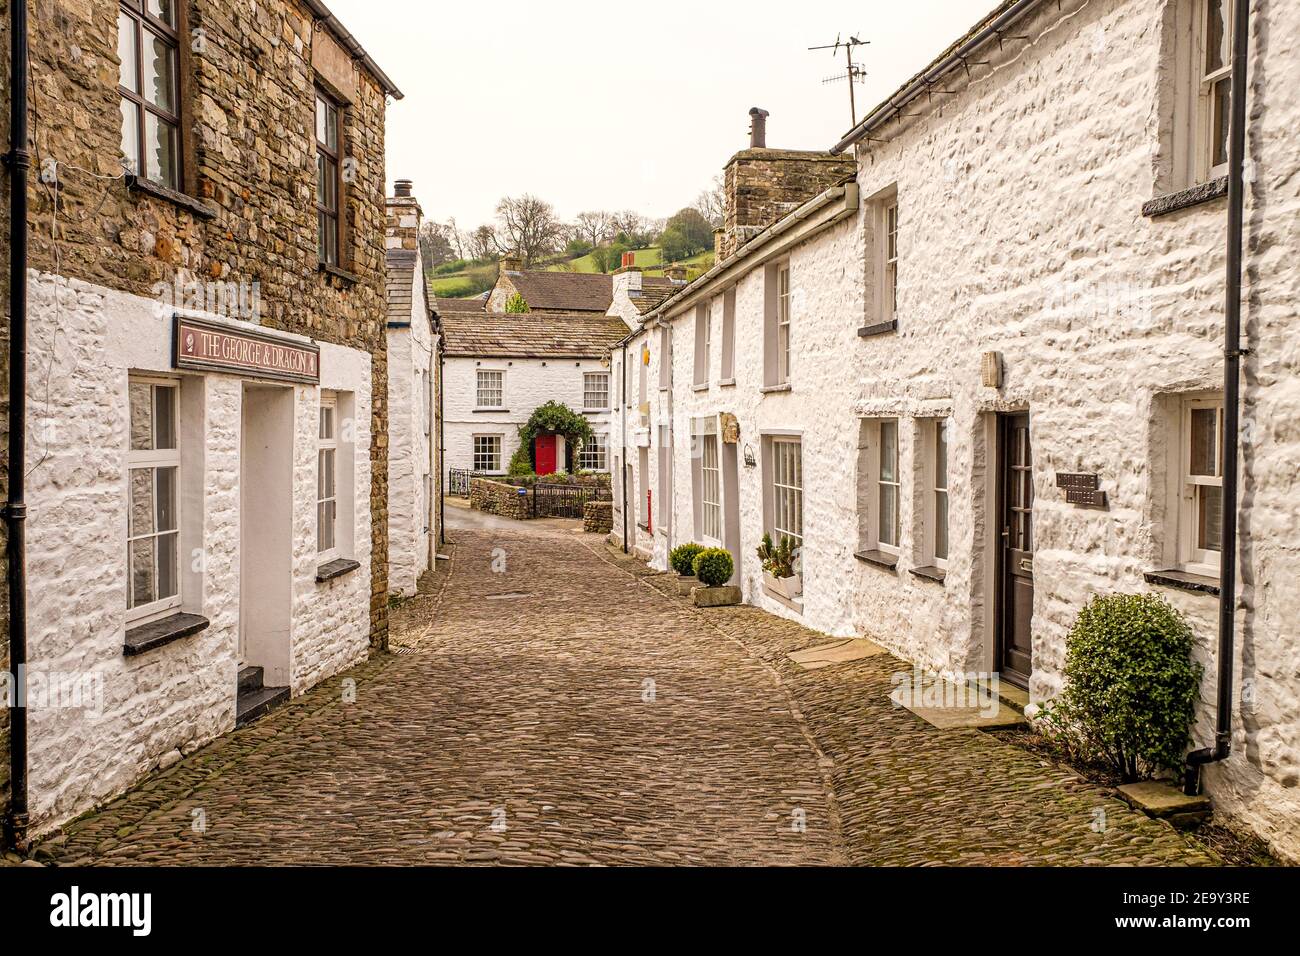 Picturesque cottages in Dent village in the Yorkshire dales Stock Photo